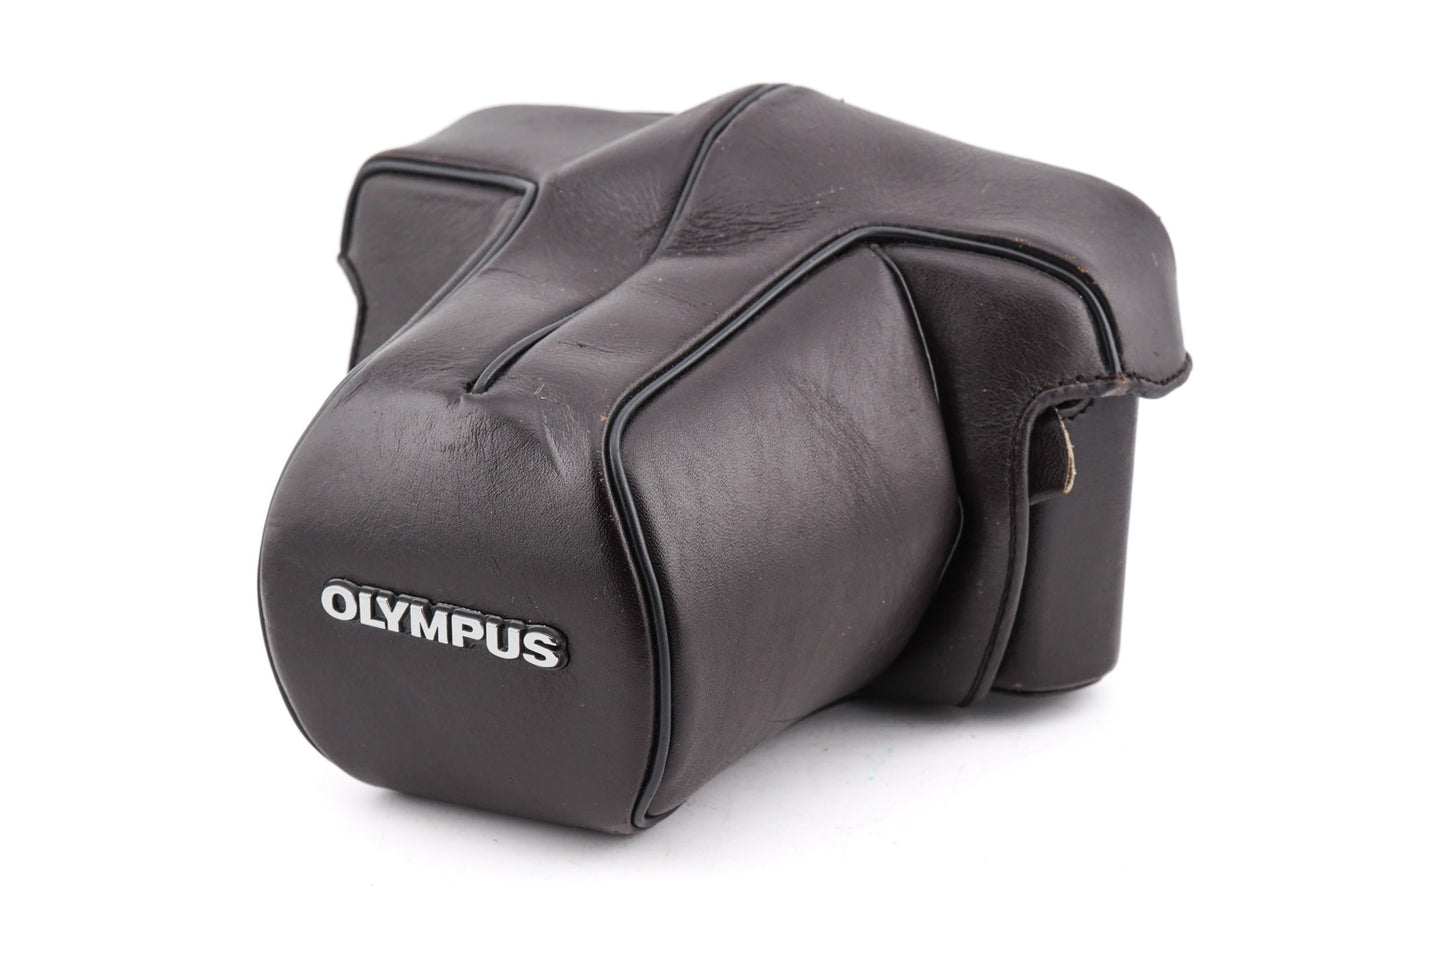 Olympus Dark Brown Leather Ever-Ready Case - Accessory